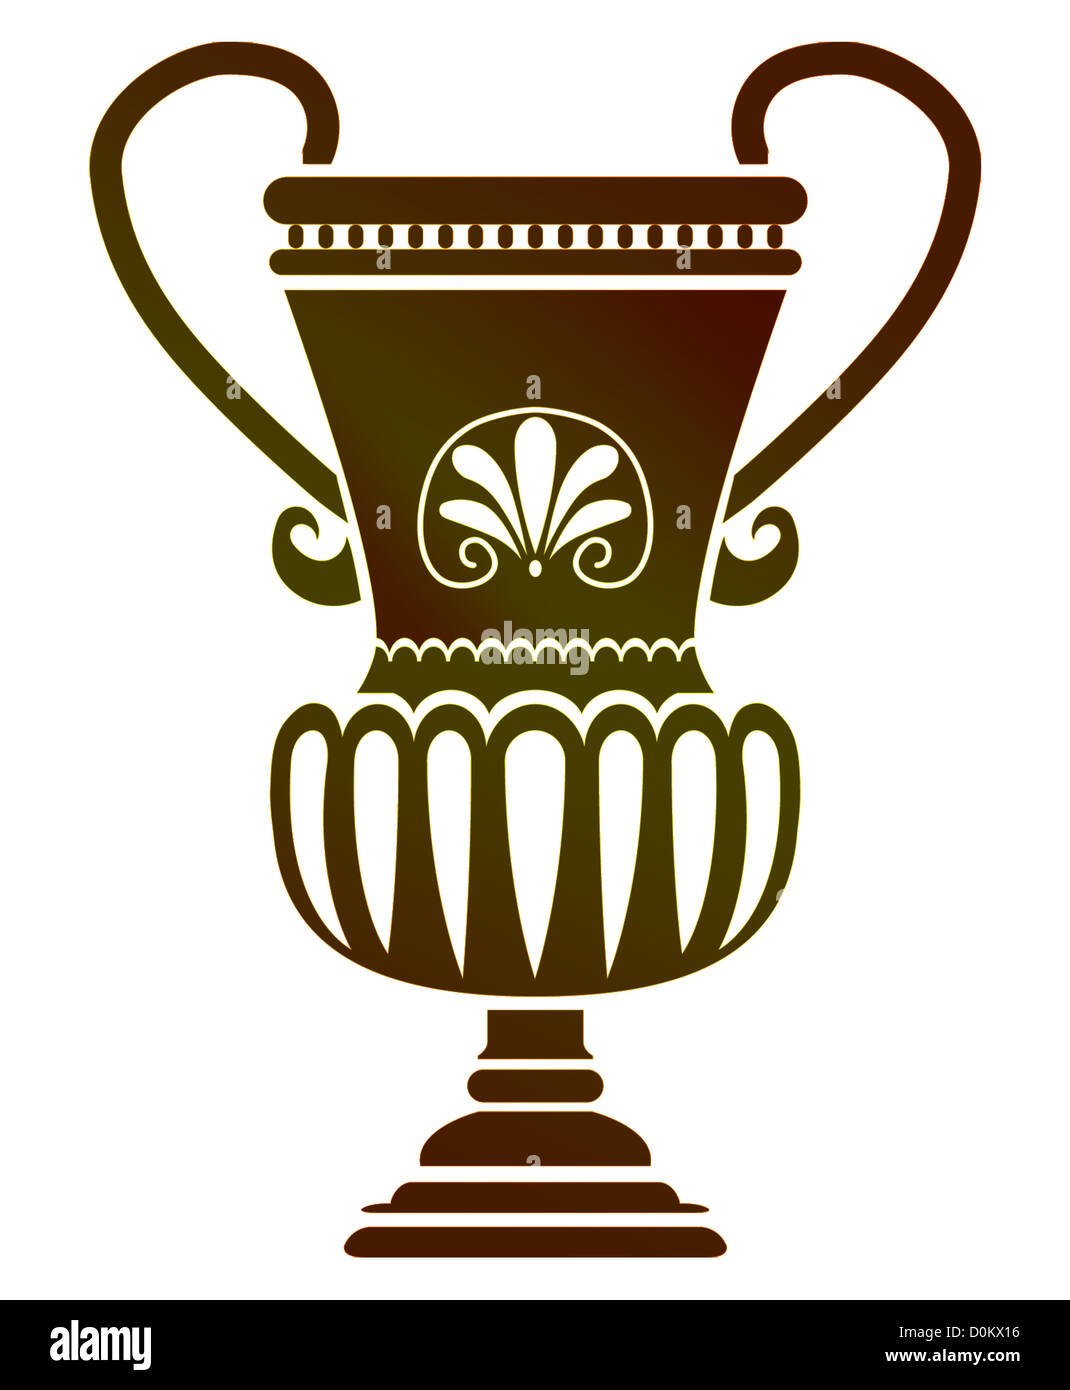 An illustration of a Trophy Stock Photo